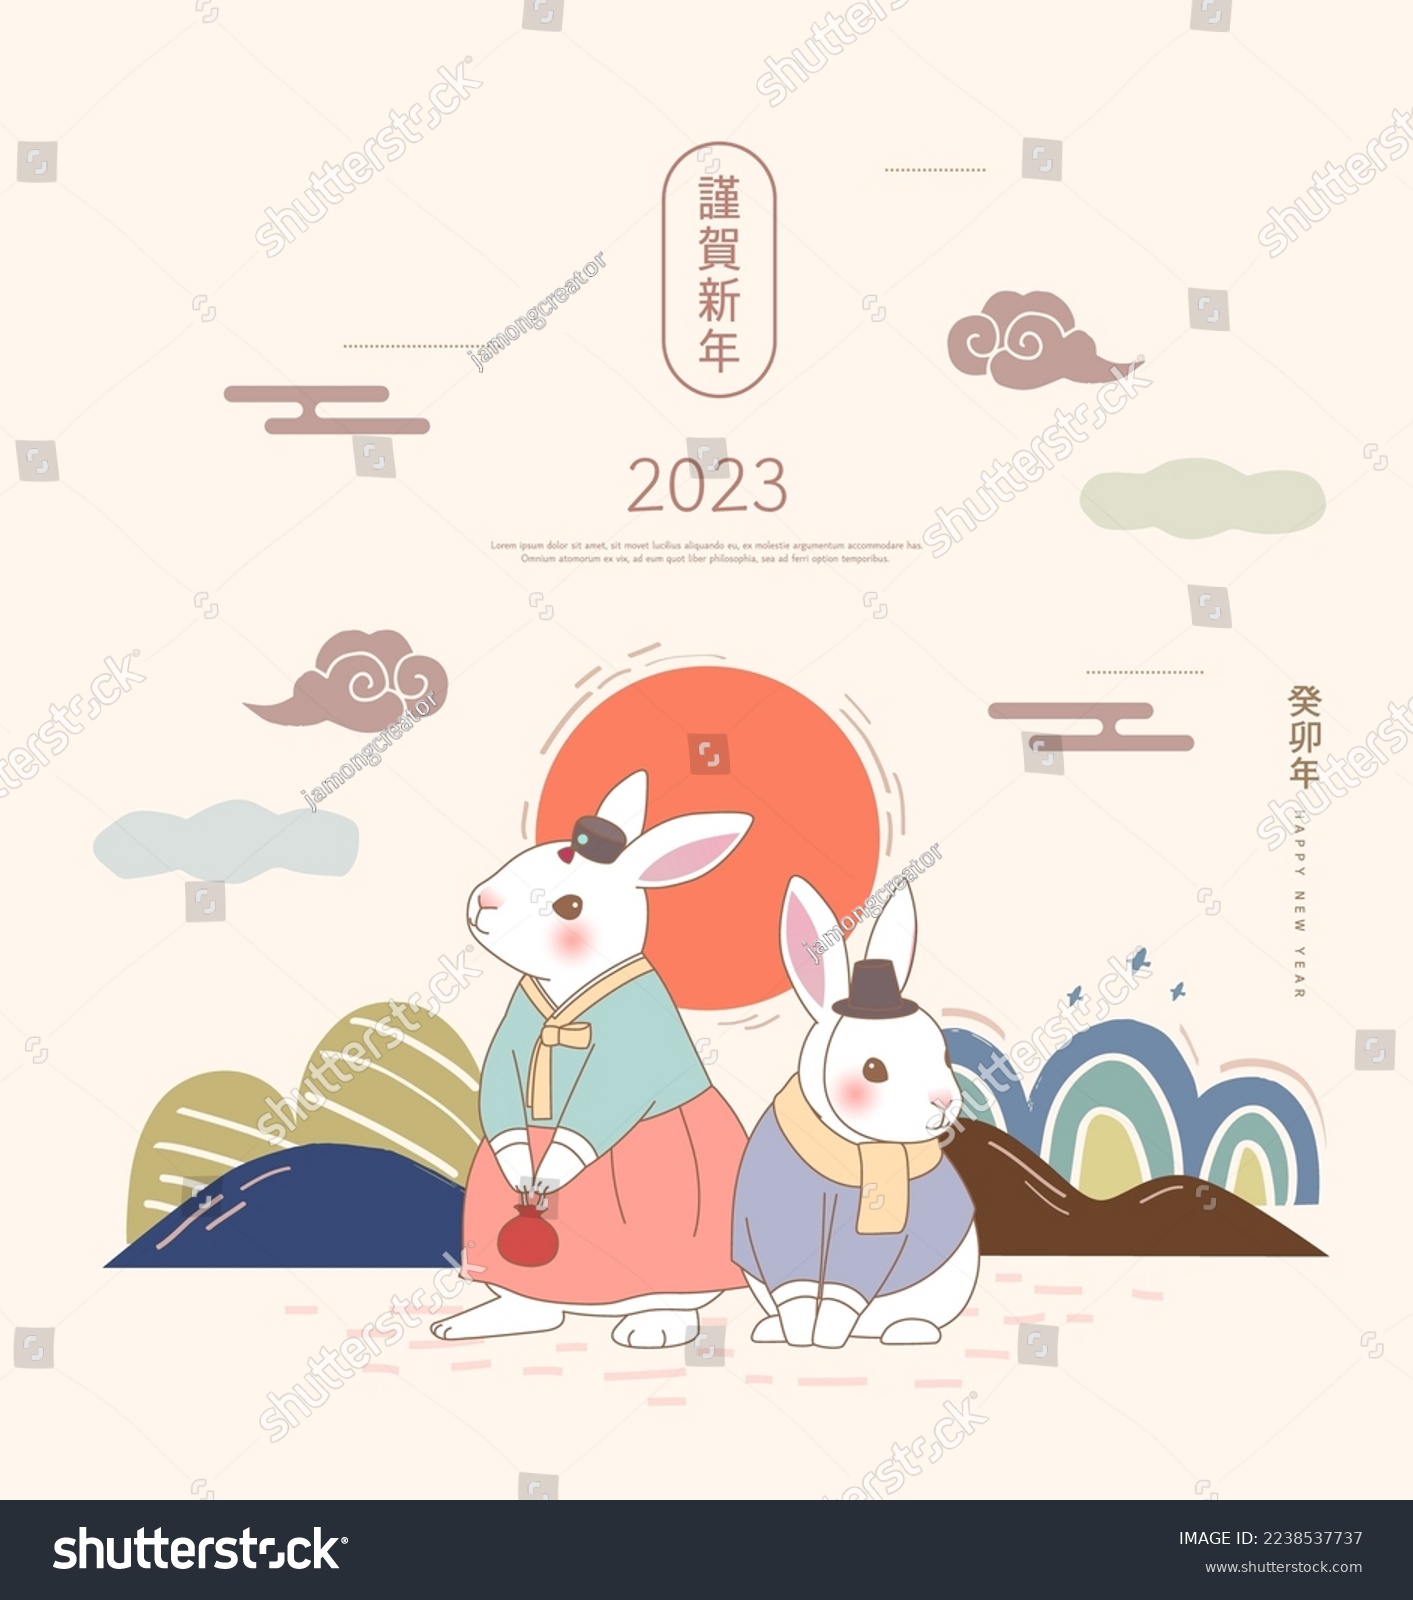 Korea Lunar New Year. New Year's Day greeting. Text Translation "rabbit year" , "happy new year"
 #2238537737